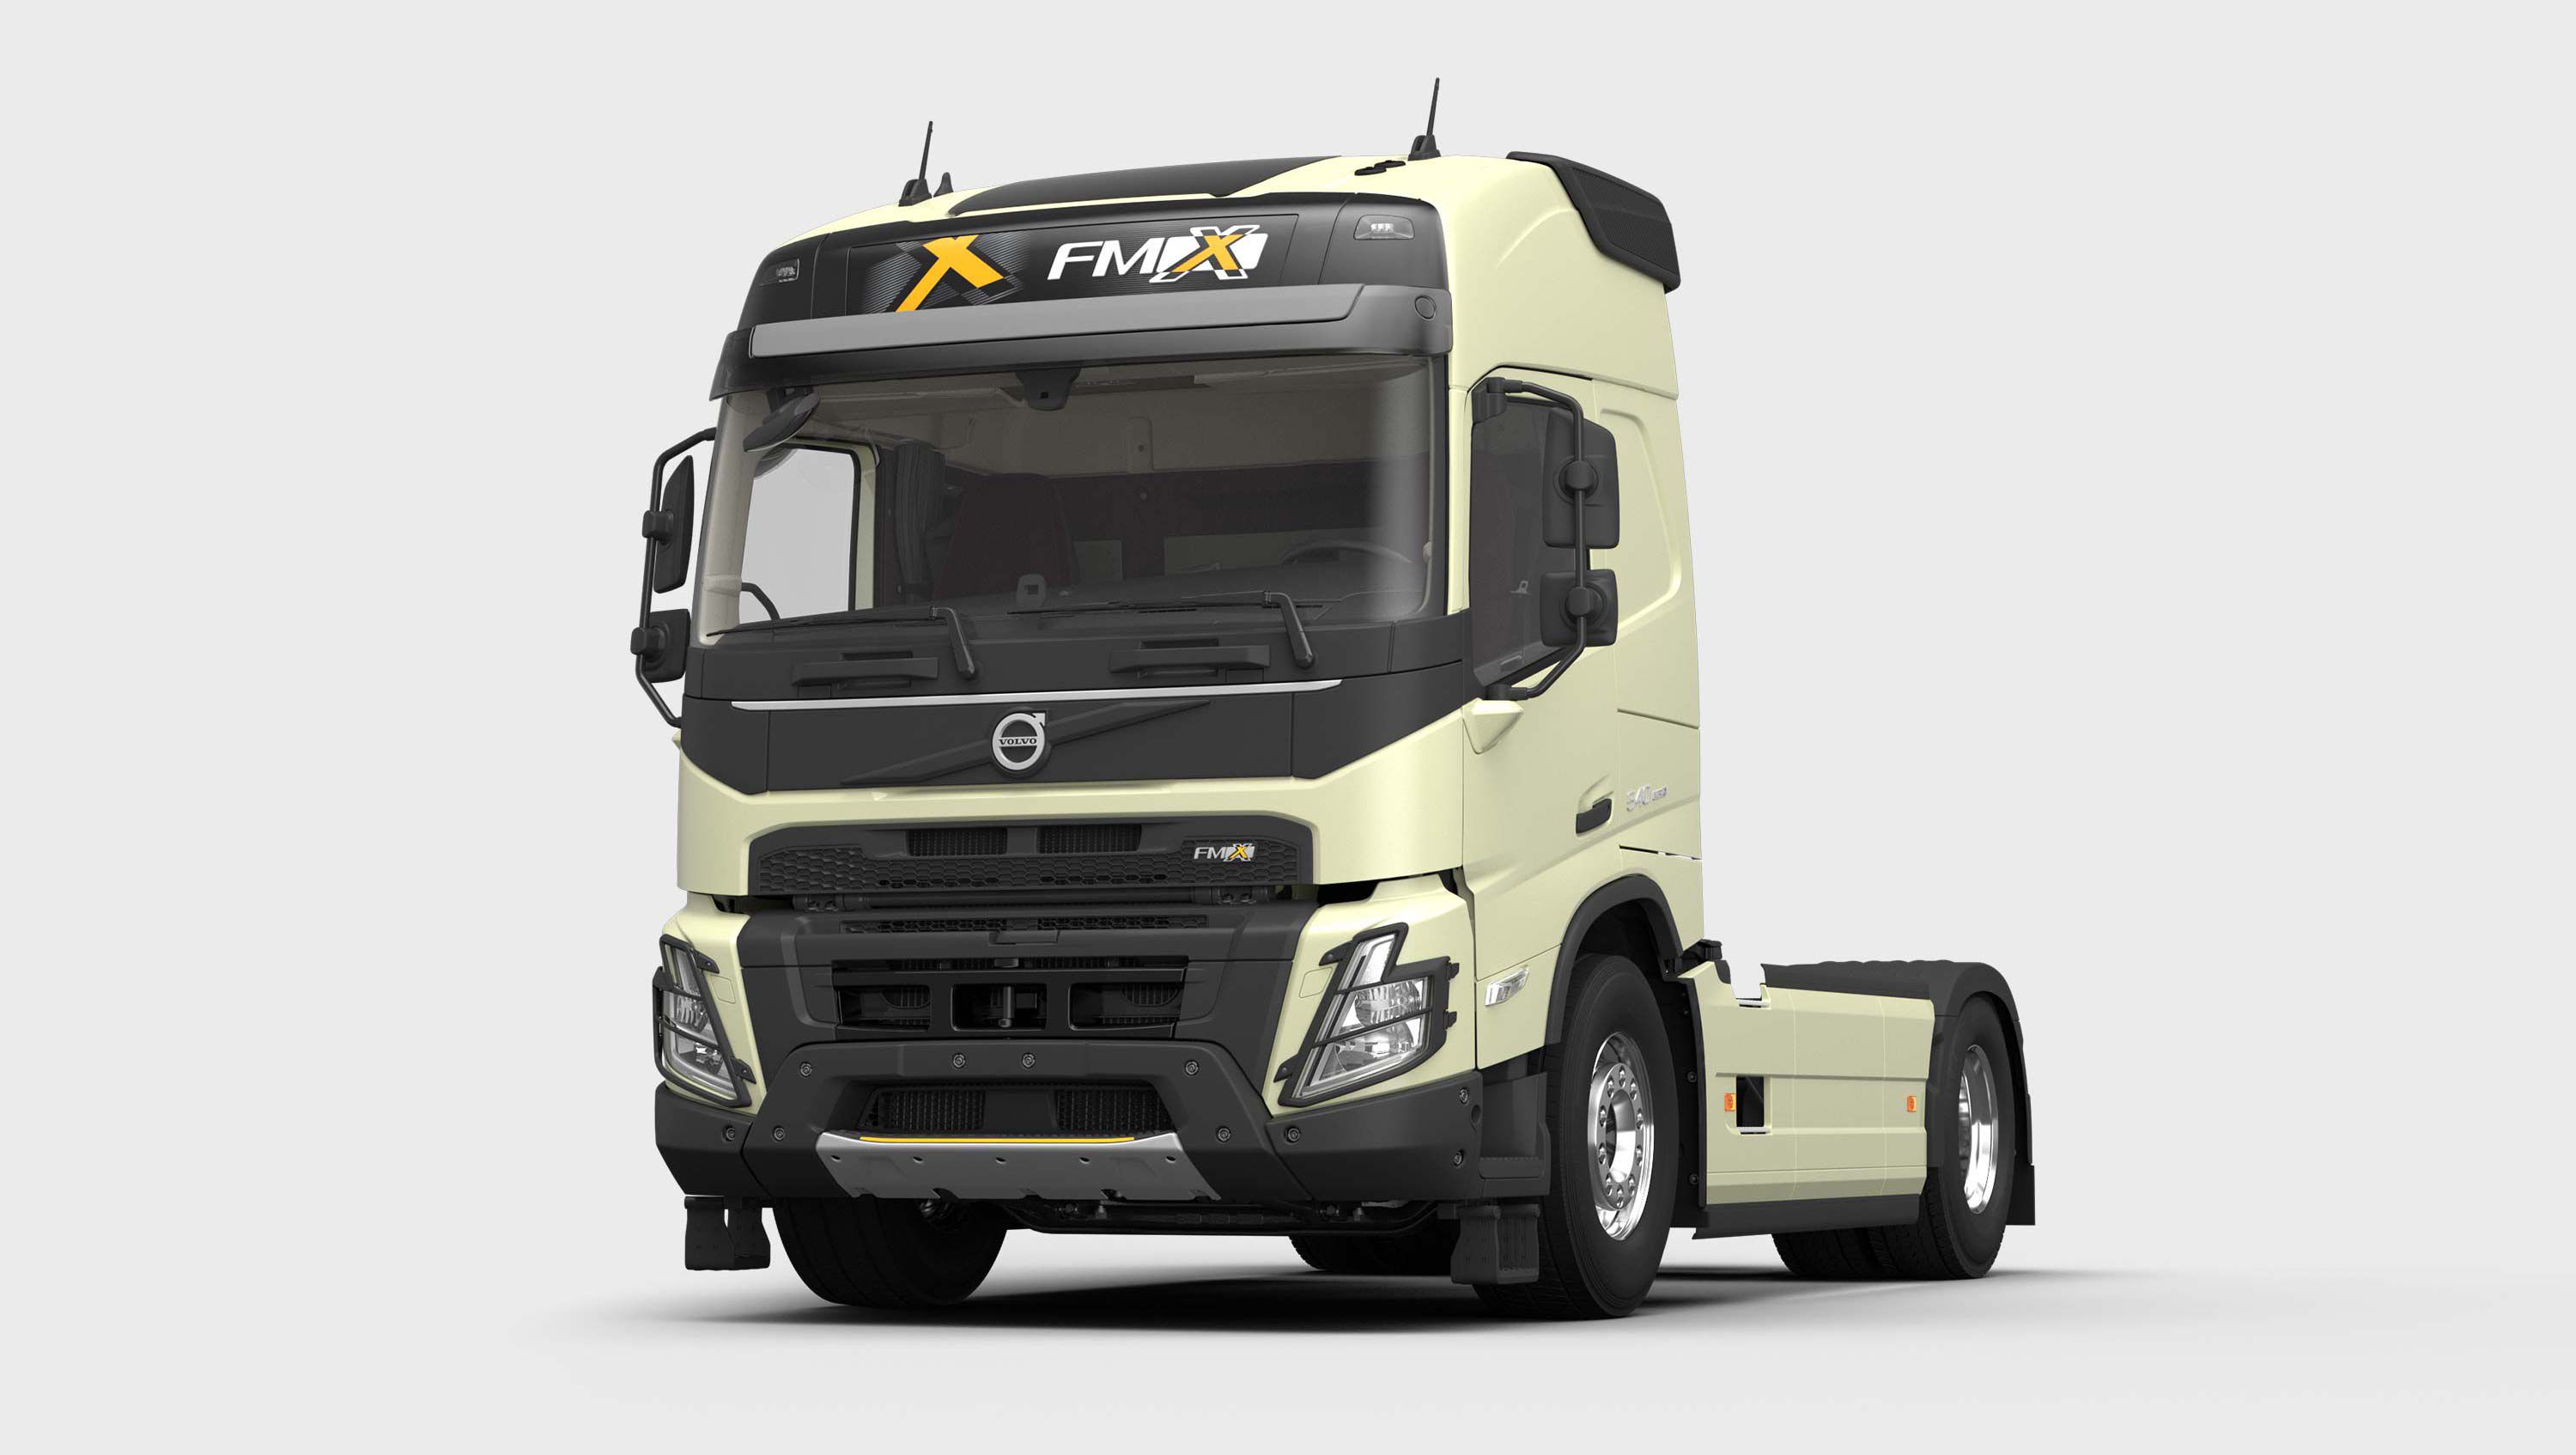 Volvo FMX specifications for cab measurements, cab height and cab features.